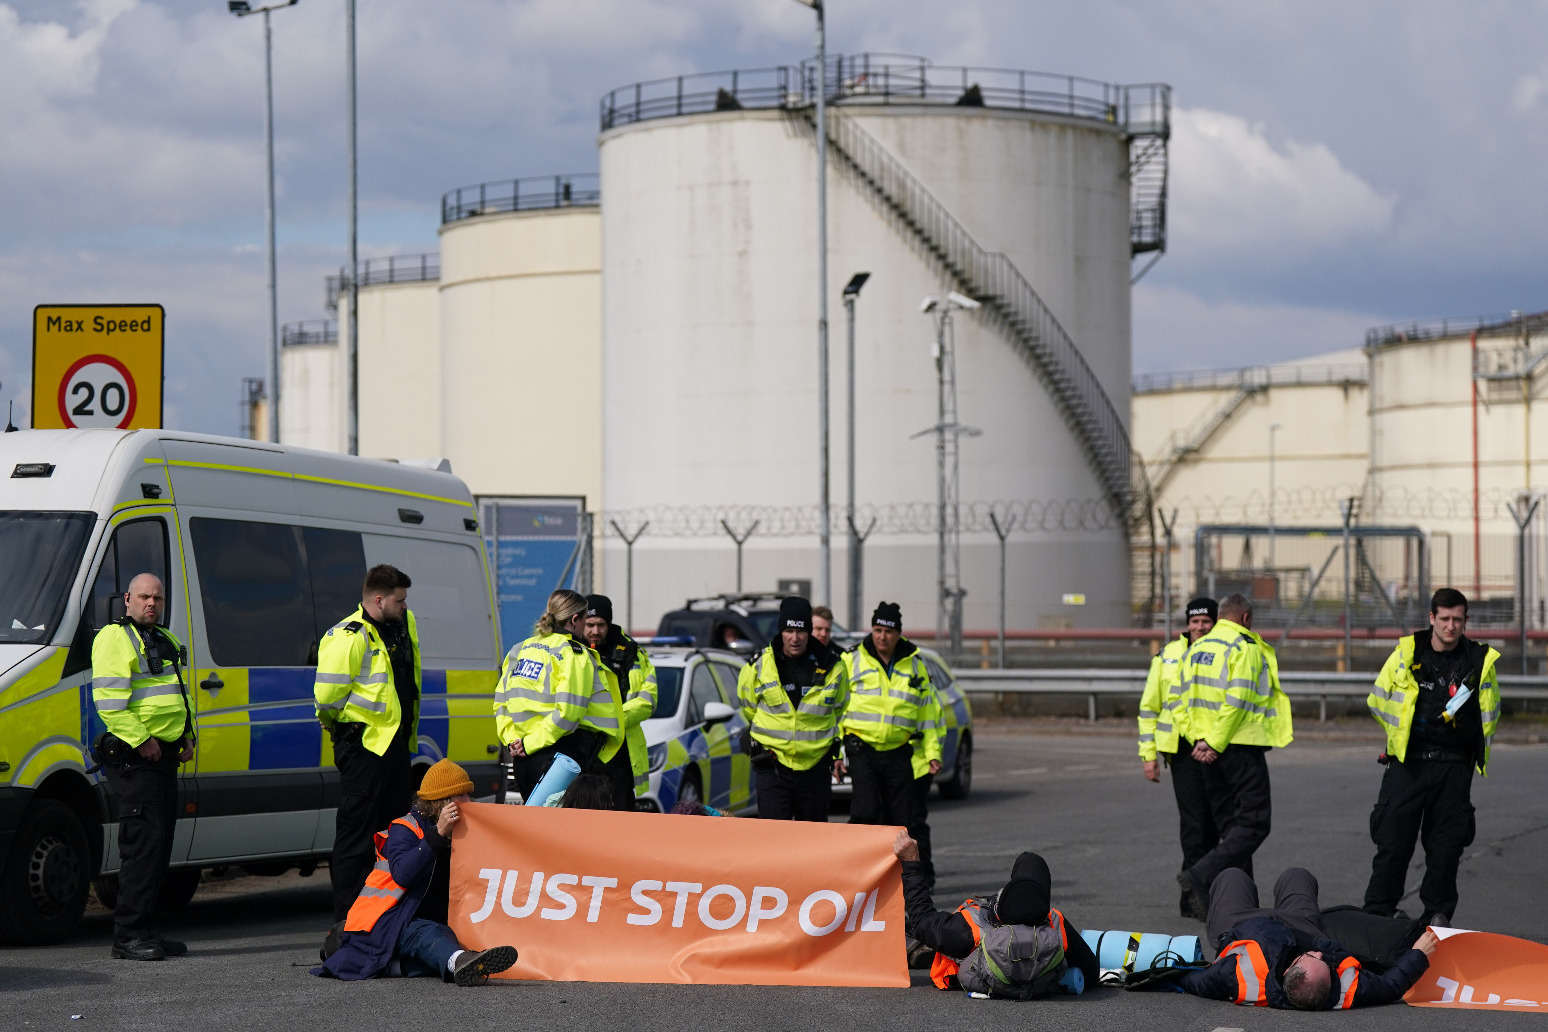 Dozens of arrests made as climate activists target oil terminals